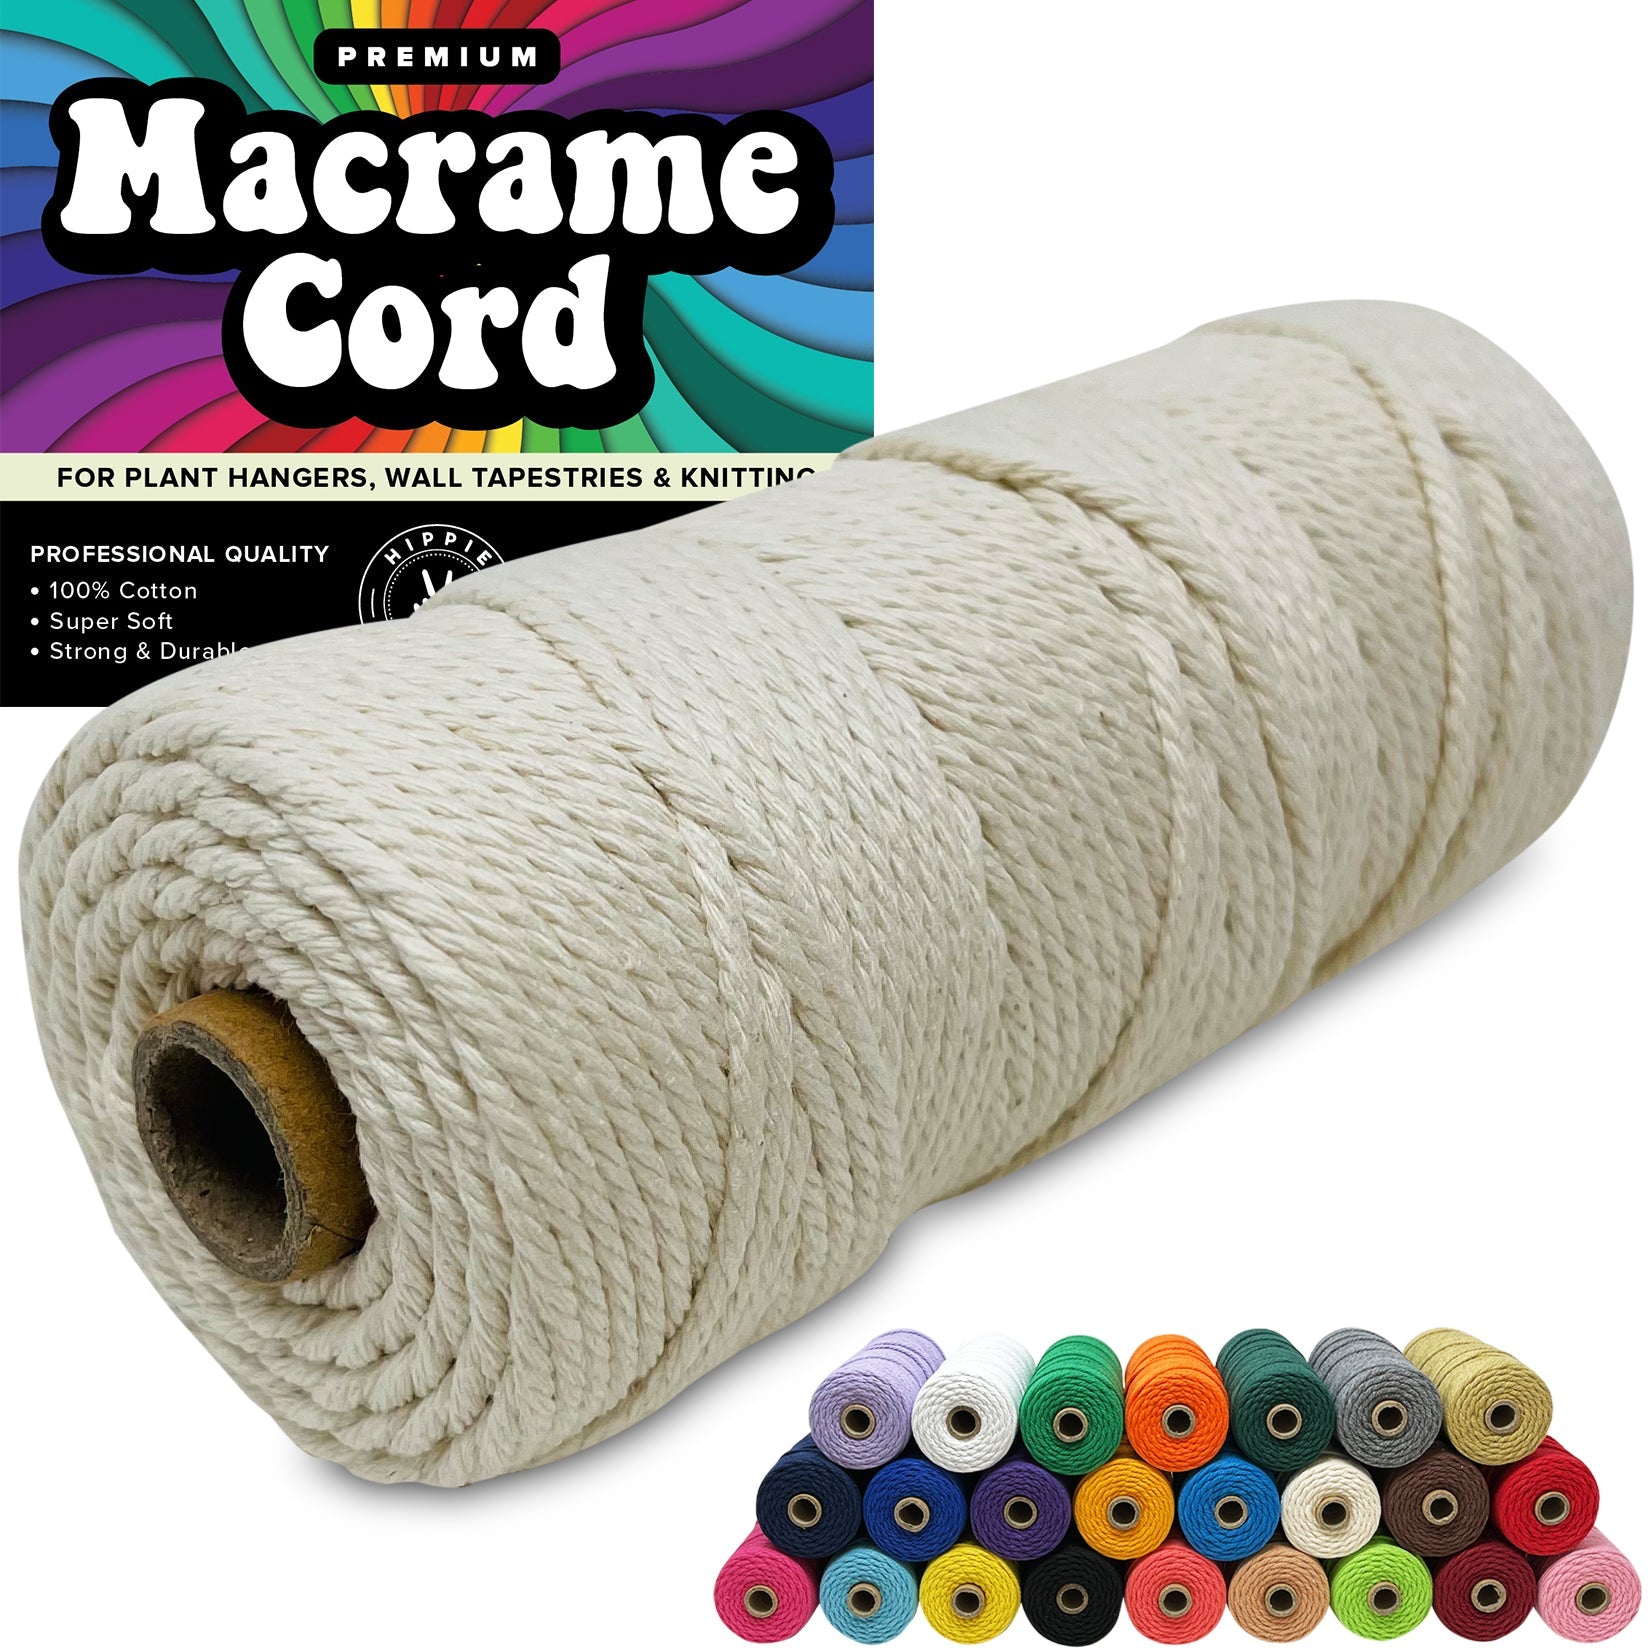 BOCHIKNOT Macrame Cord 3mm - Macrame Cord 3Ply Strand - Cotton Cord for Macrame Knotting - 3 Ply Macrame Rope Supplies in 3mm 4mm 5mm for Crafts